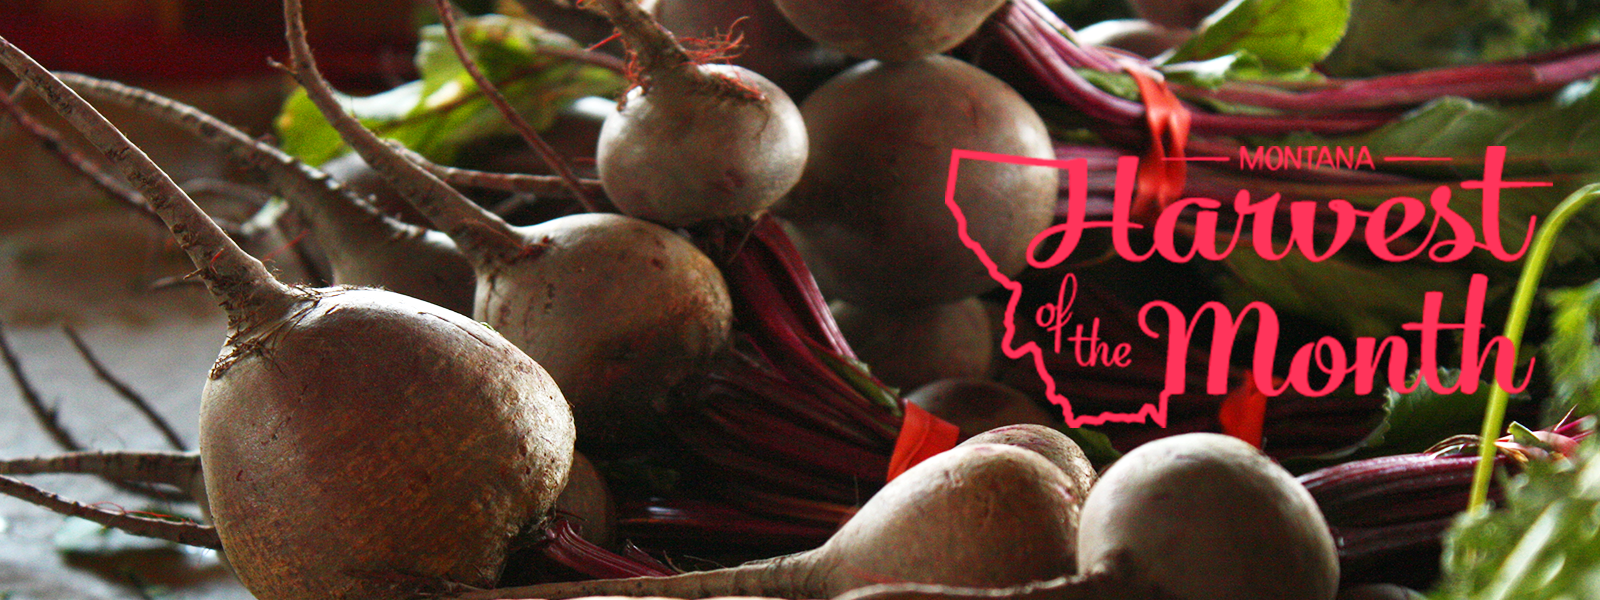 Beets banner image